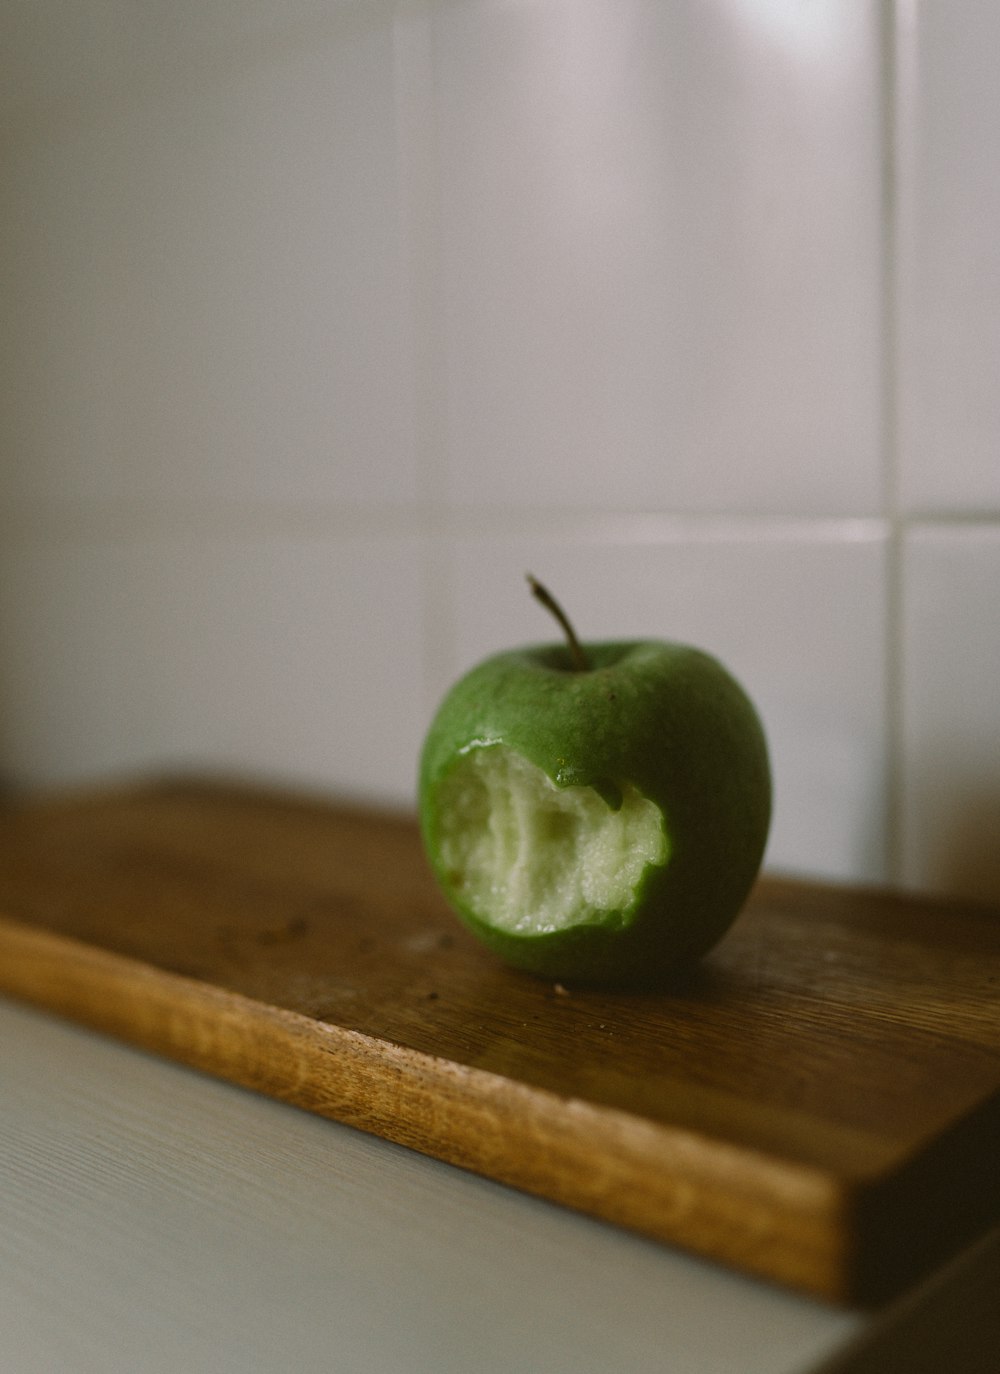 a green apple on a wooden surface